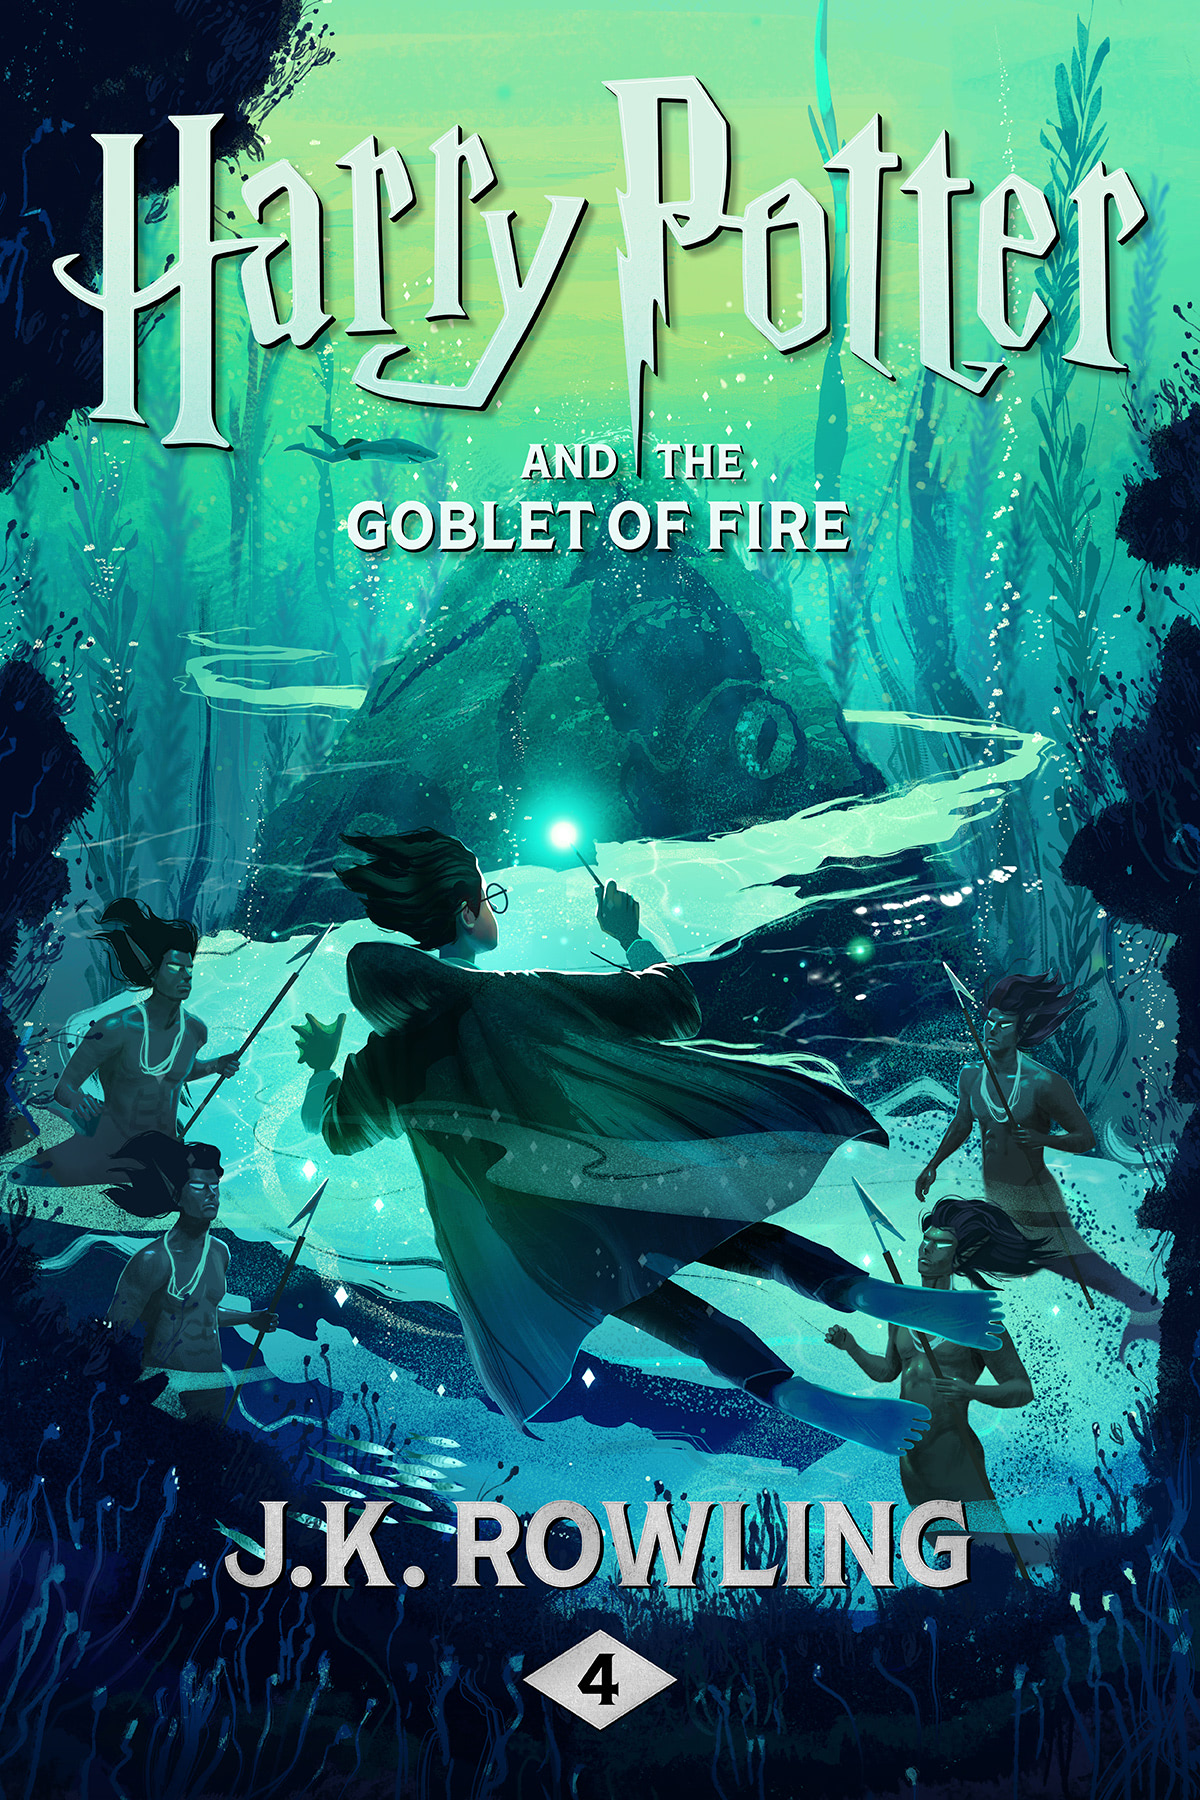 ‘Goblet of Fire’ 2022 Pottermore eBook/audiobook cover